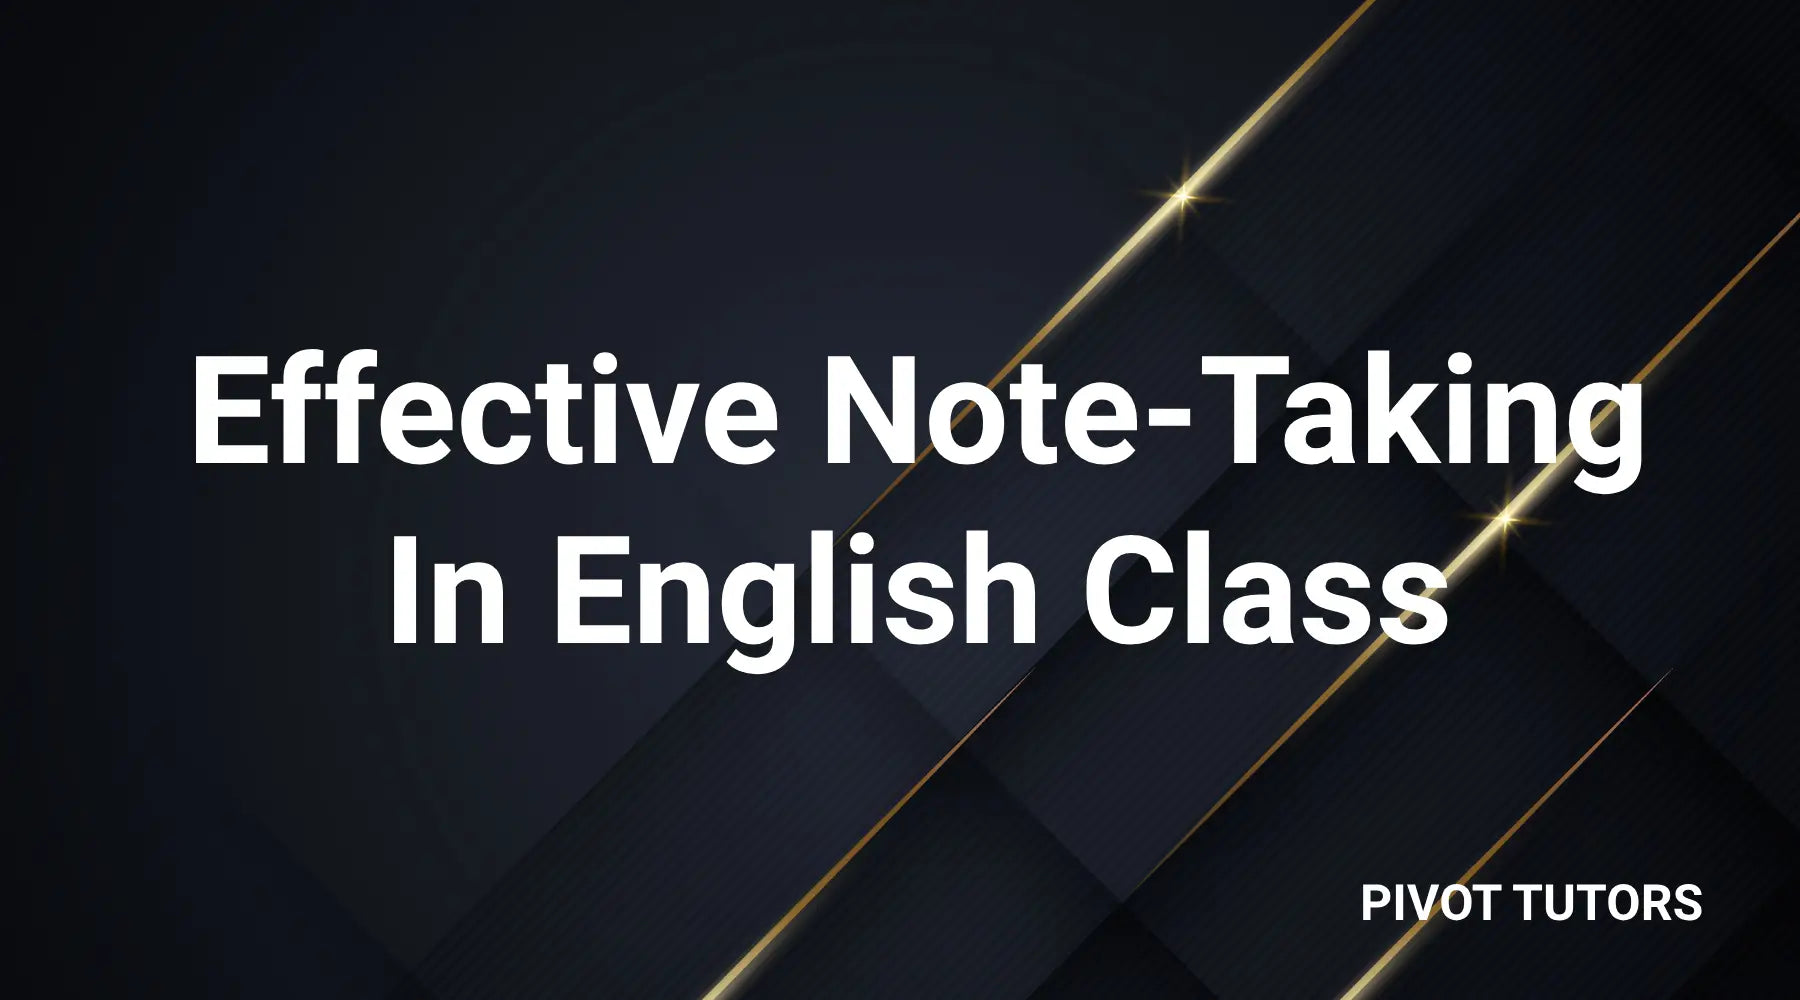 Effective Note-taking in English Class